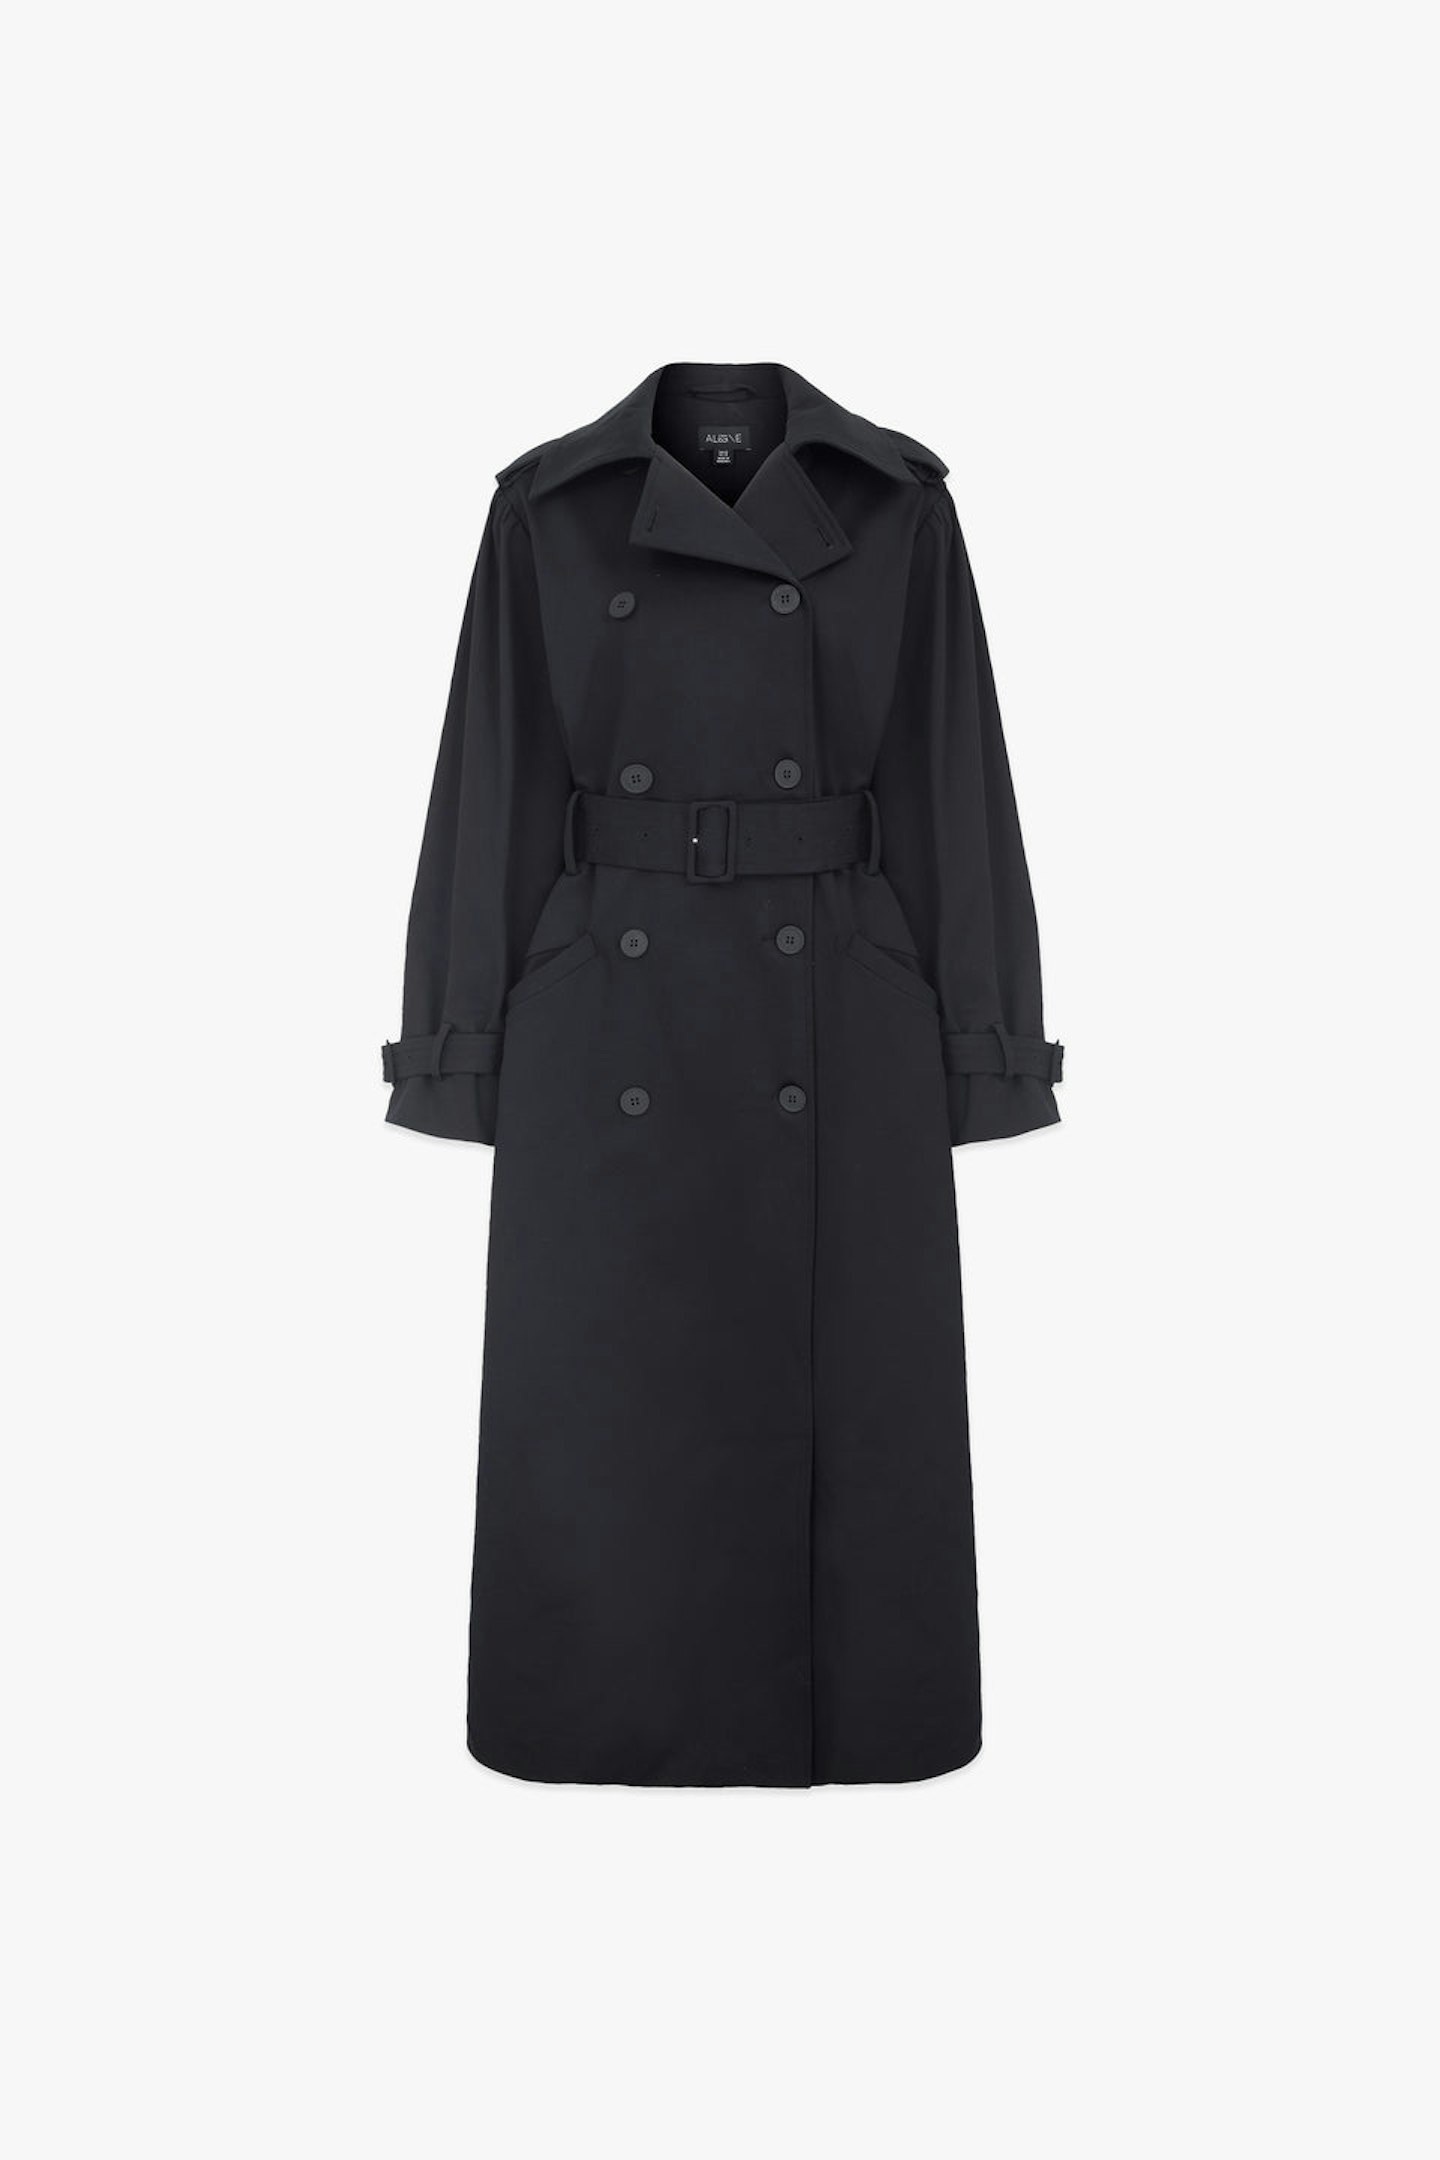 The Best Black Coats Available On The Market Right Now